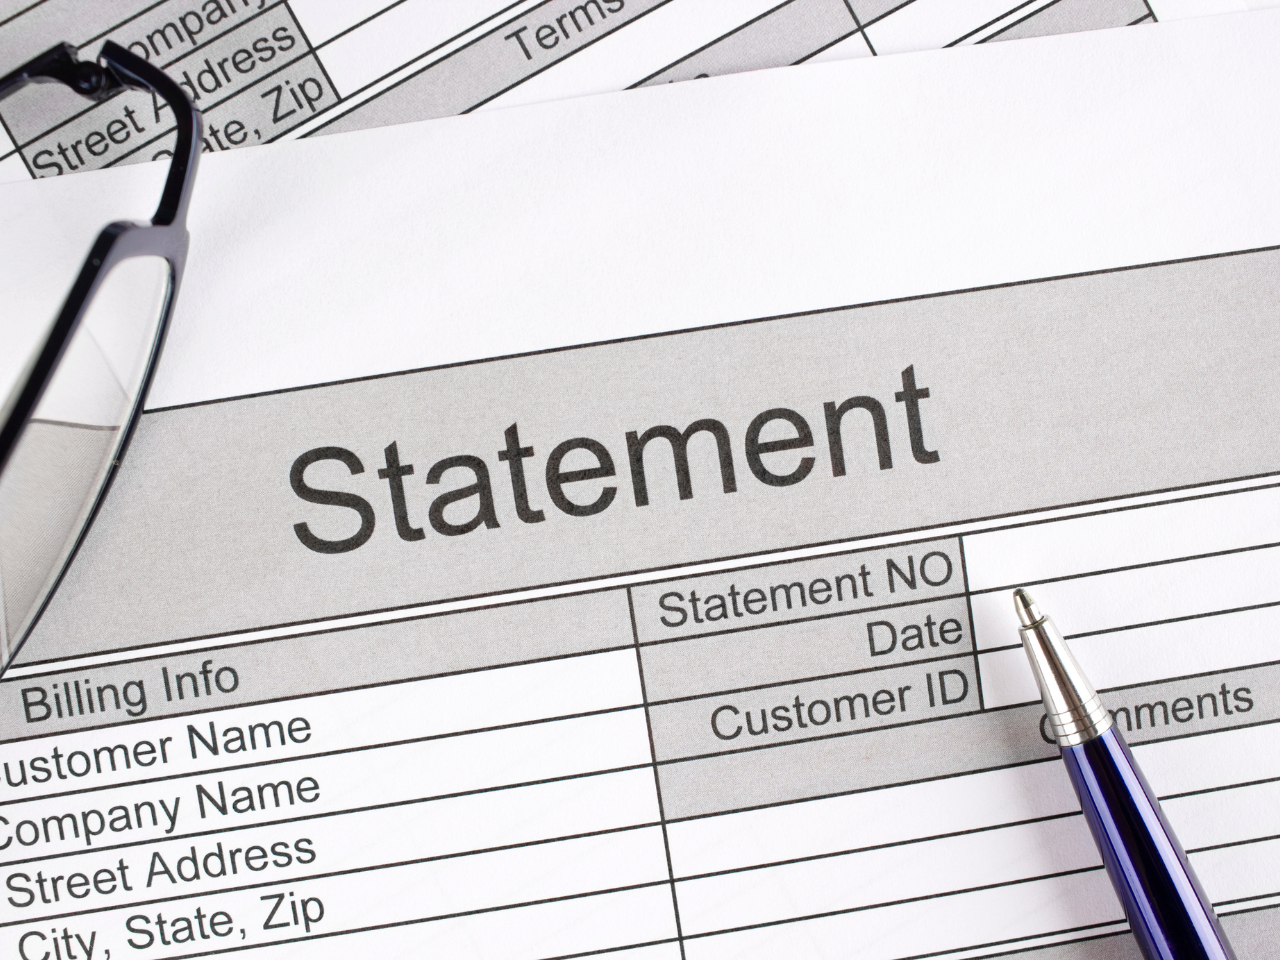 Annual Statement Available Online